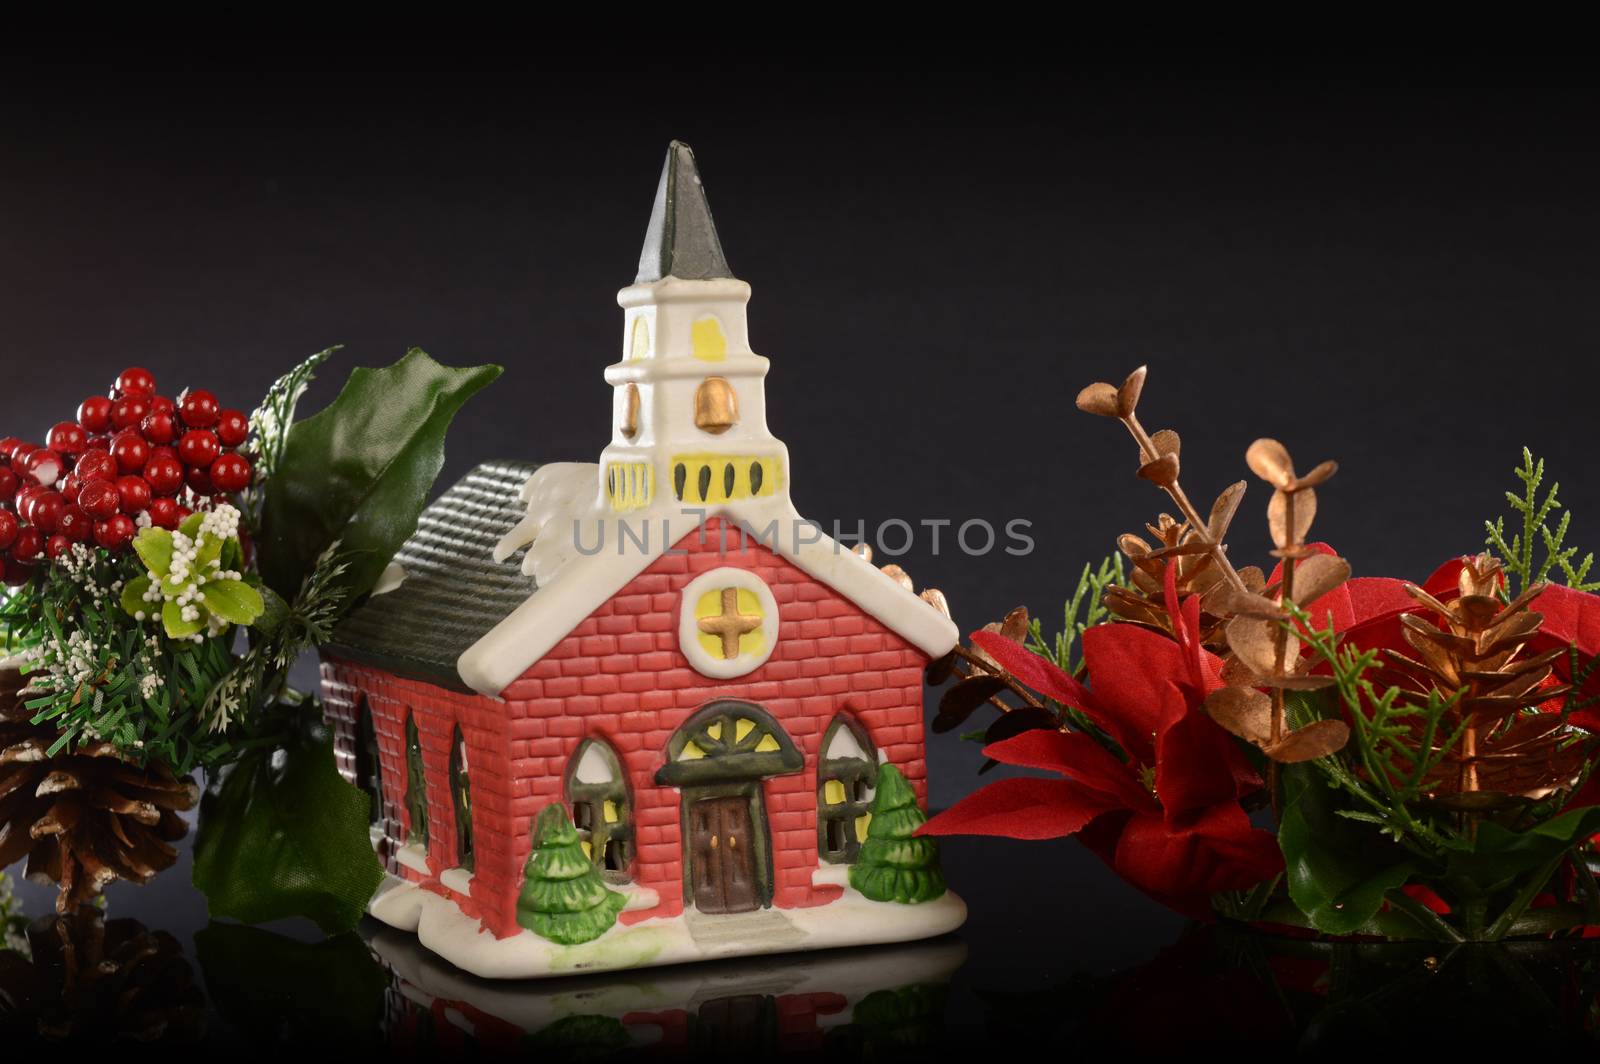 A closeup image of a Christmas church scene decorated for the holiday season.